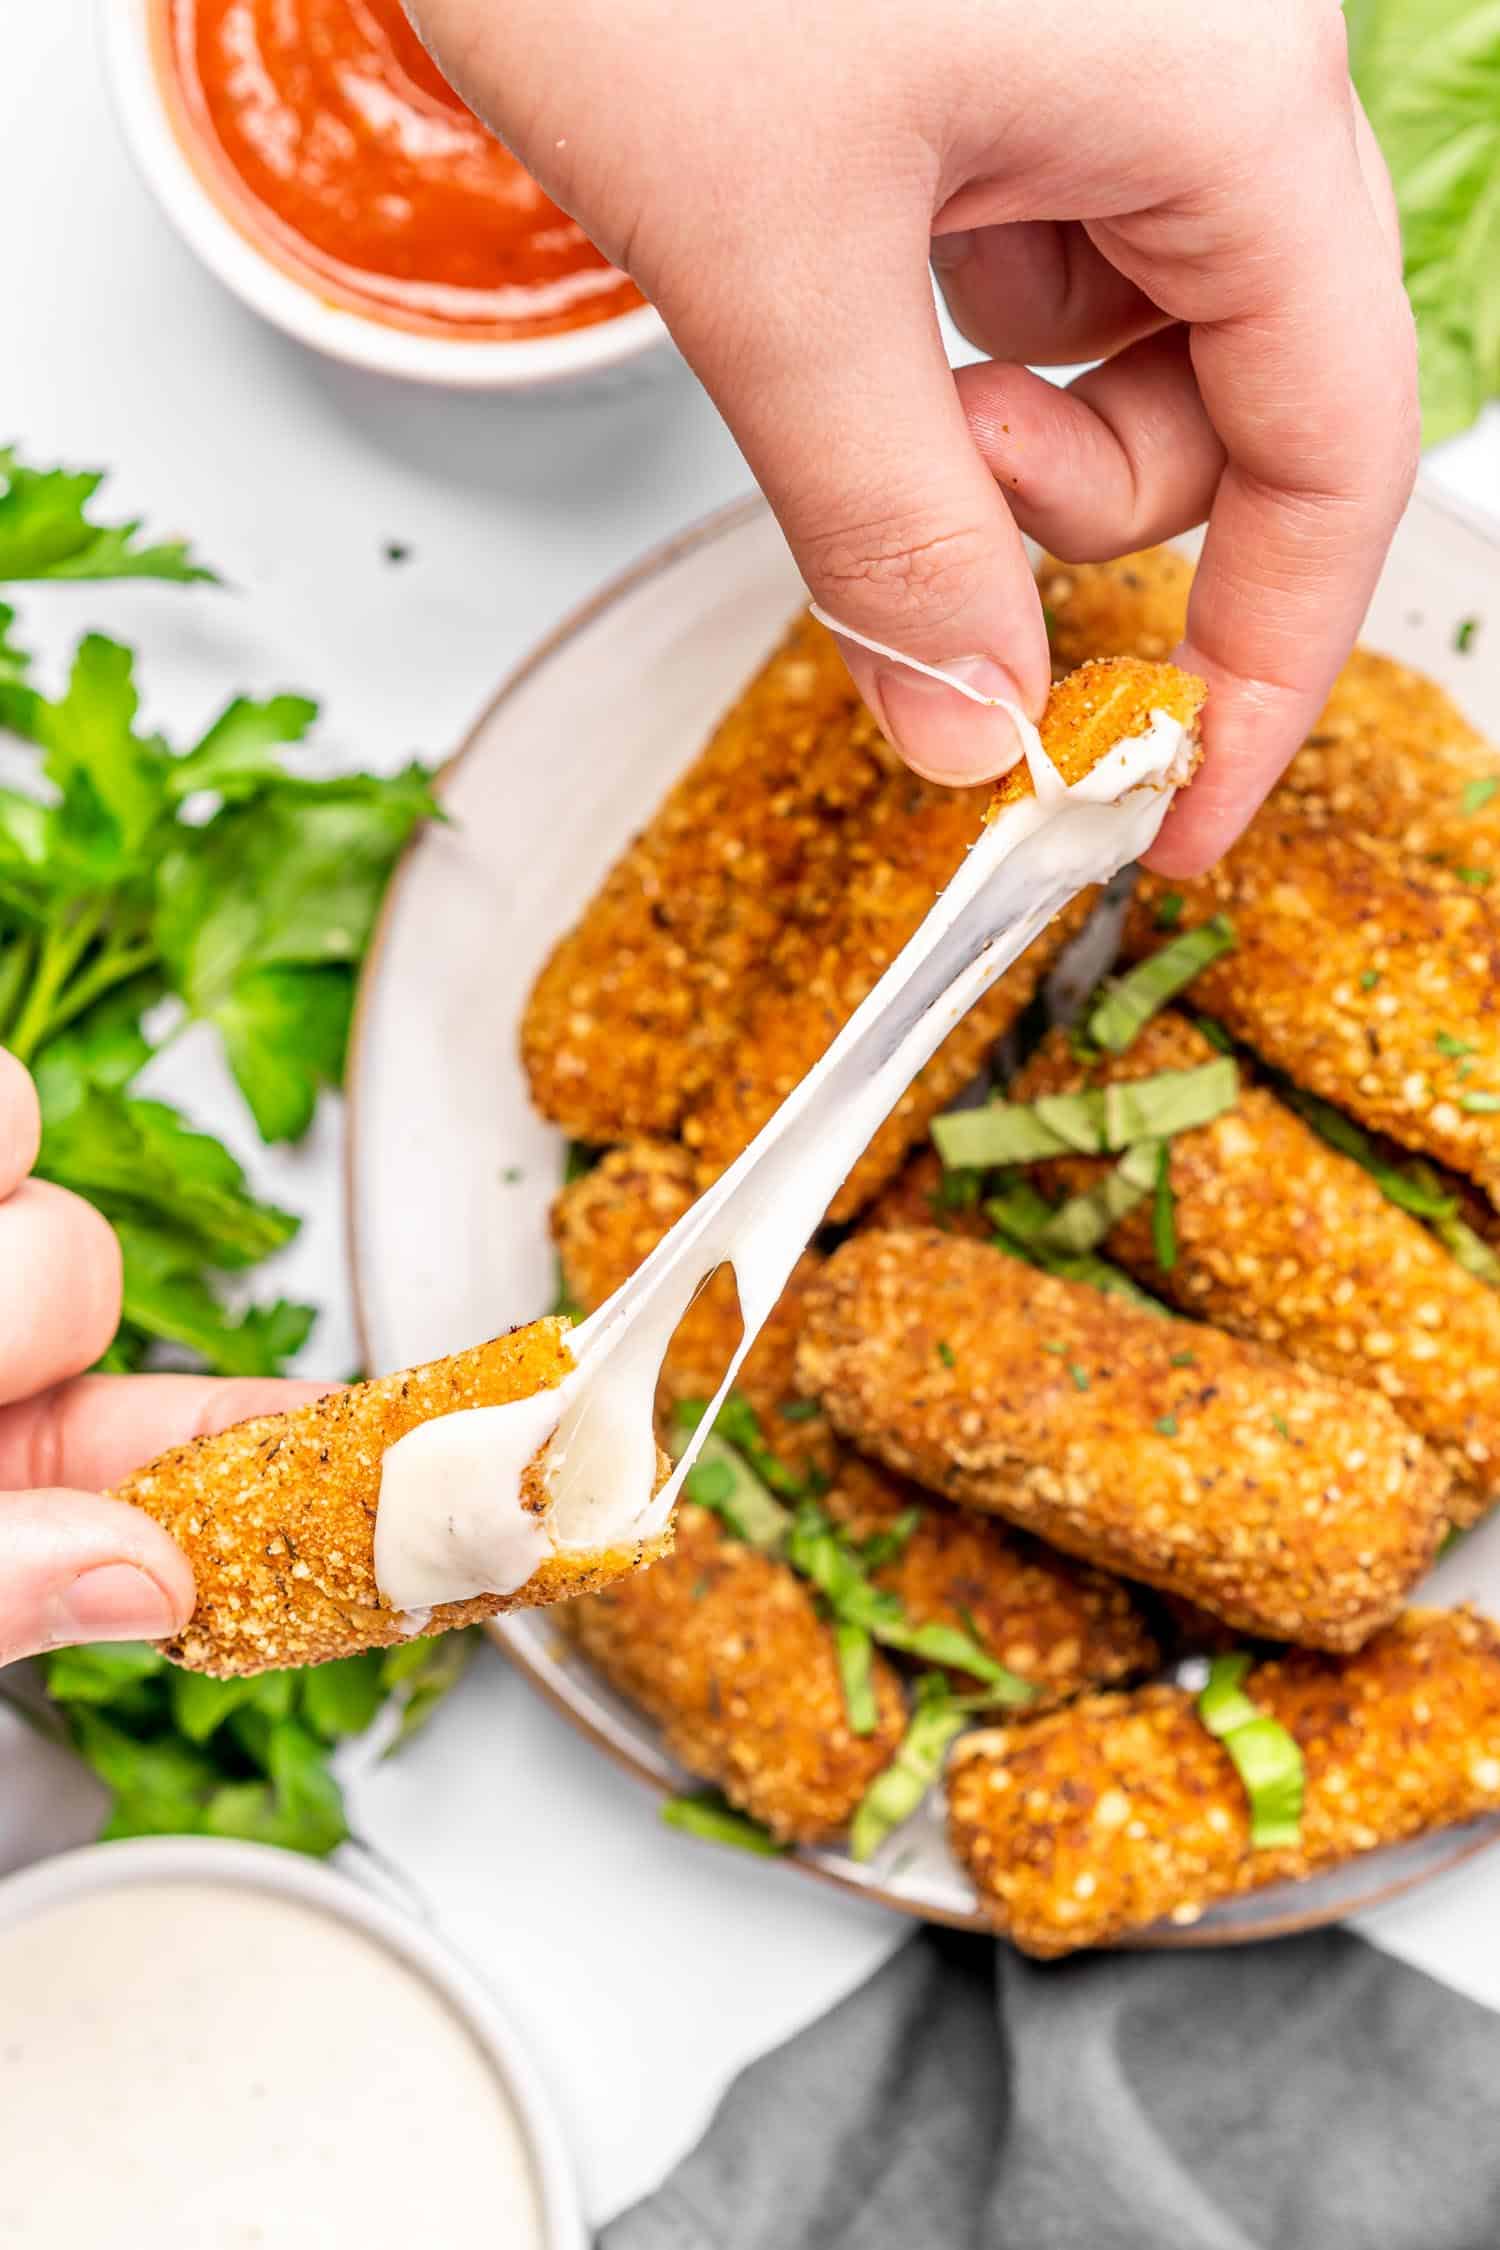 Keto Cheese Sticks being pulled apart to show a long pull of cheese in the middle. There is a plate of cheese sticks in the background along with fresh parsley and marinara dipping sauce